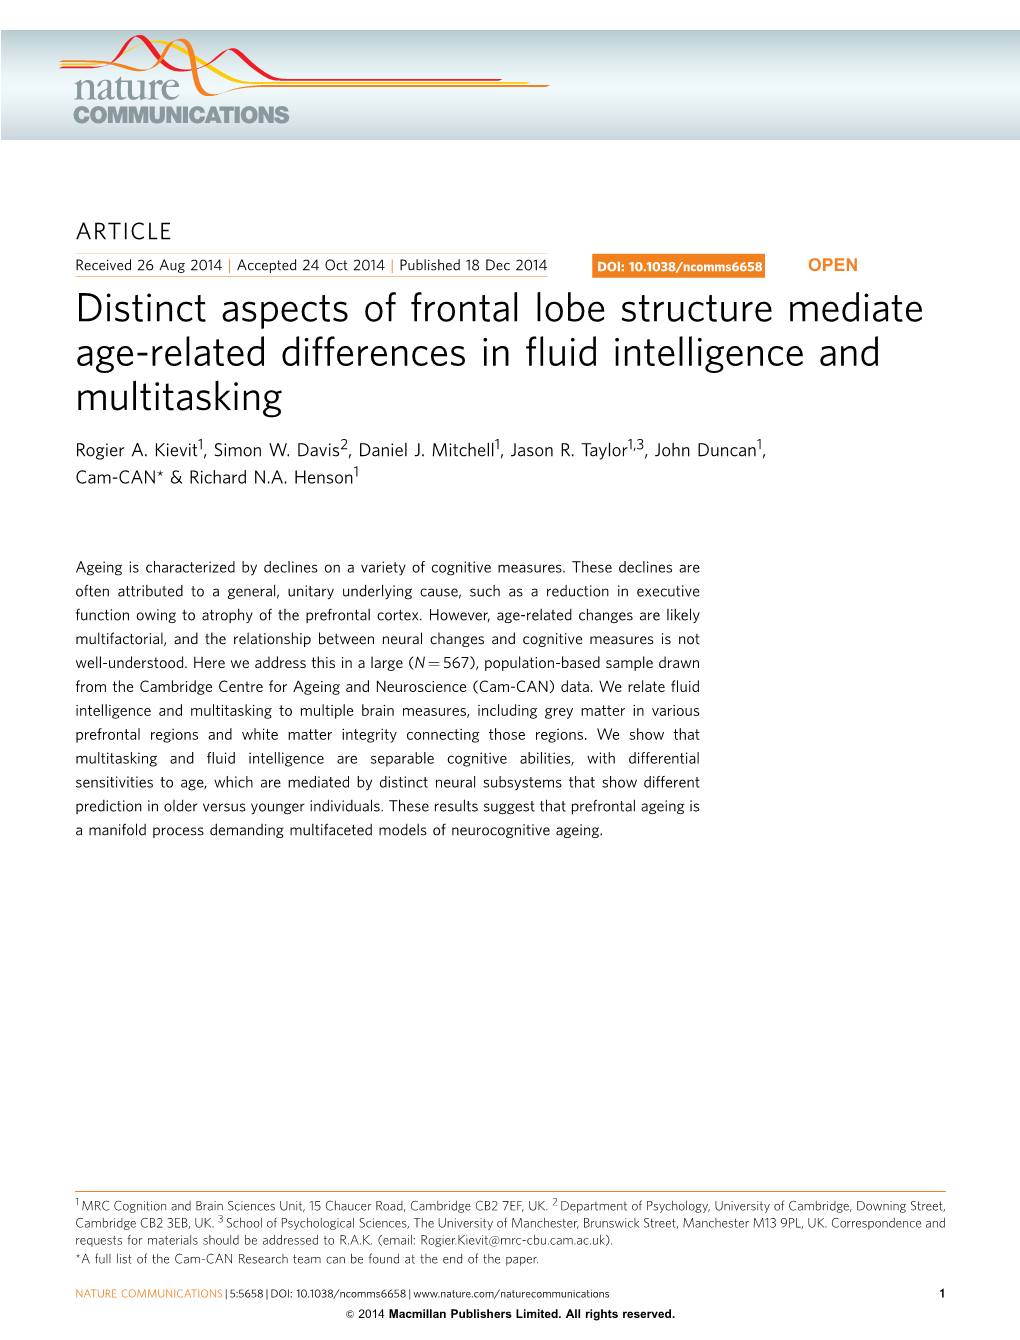 Distinct Aspects of Frontal Lobe Structure Mediate Age-Related Differences in Fluid Intelligence and Multitasking